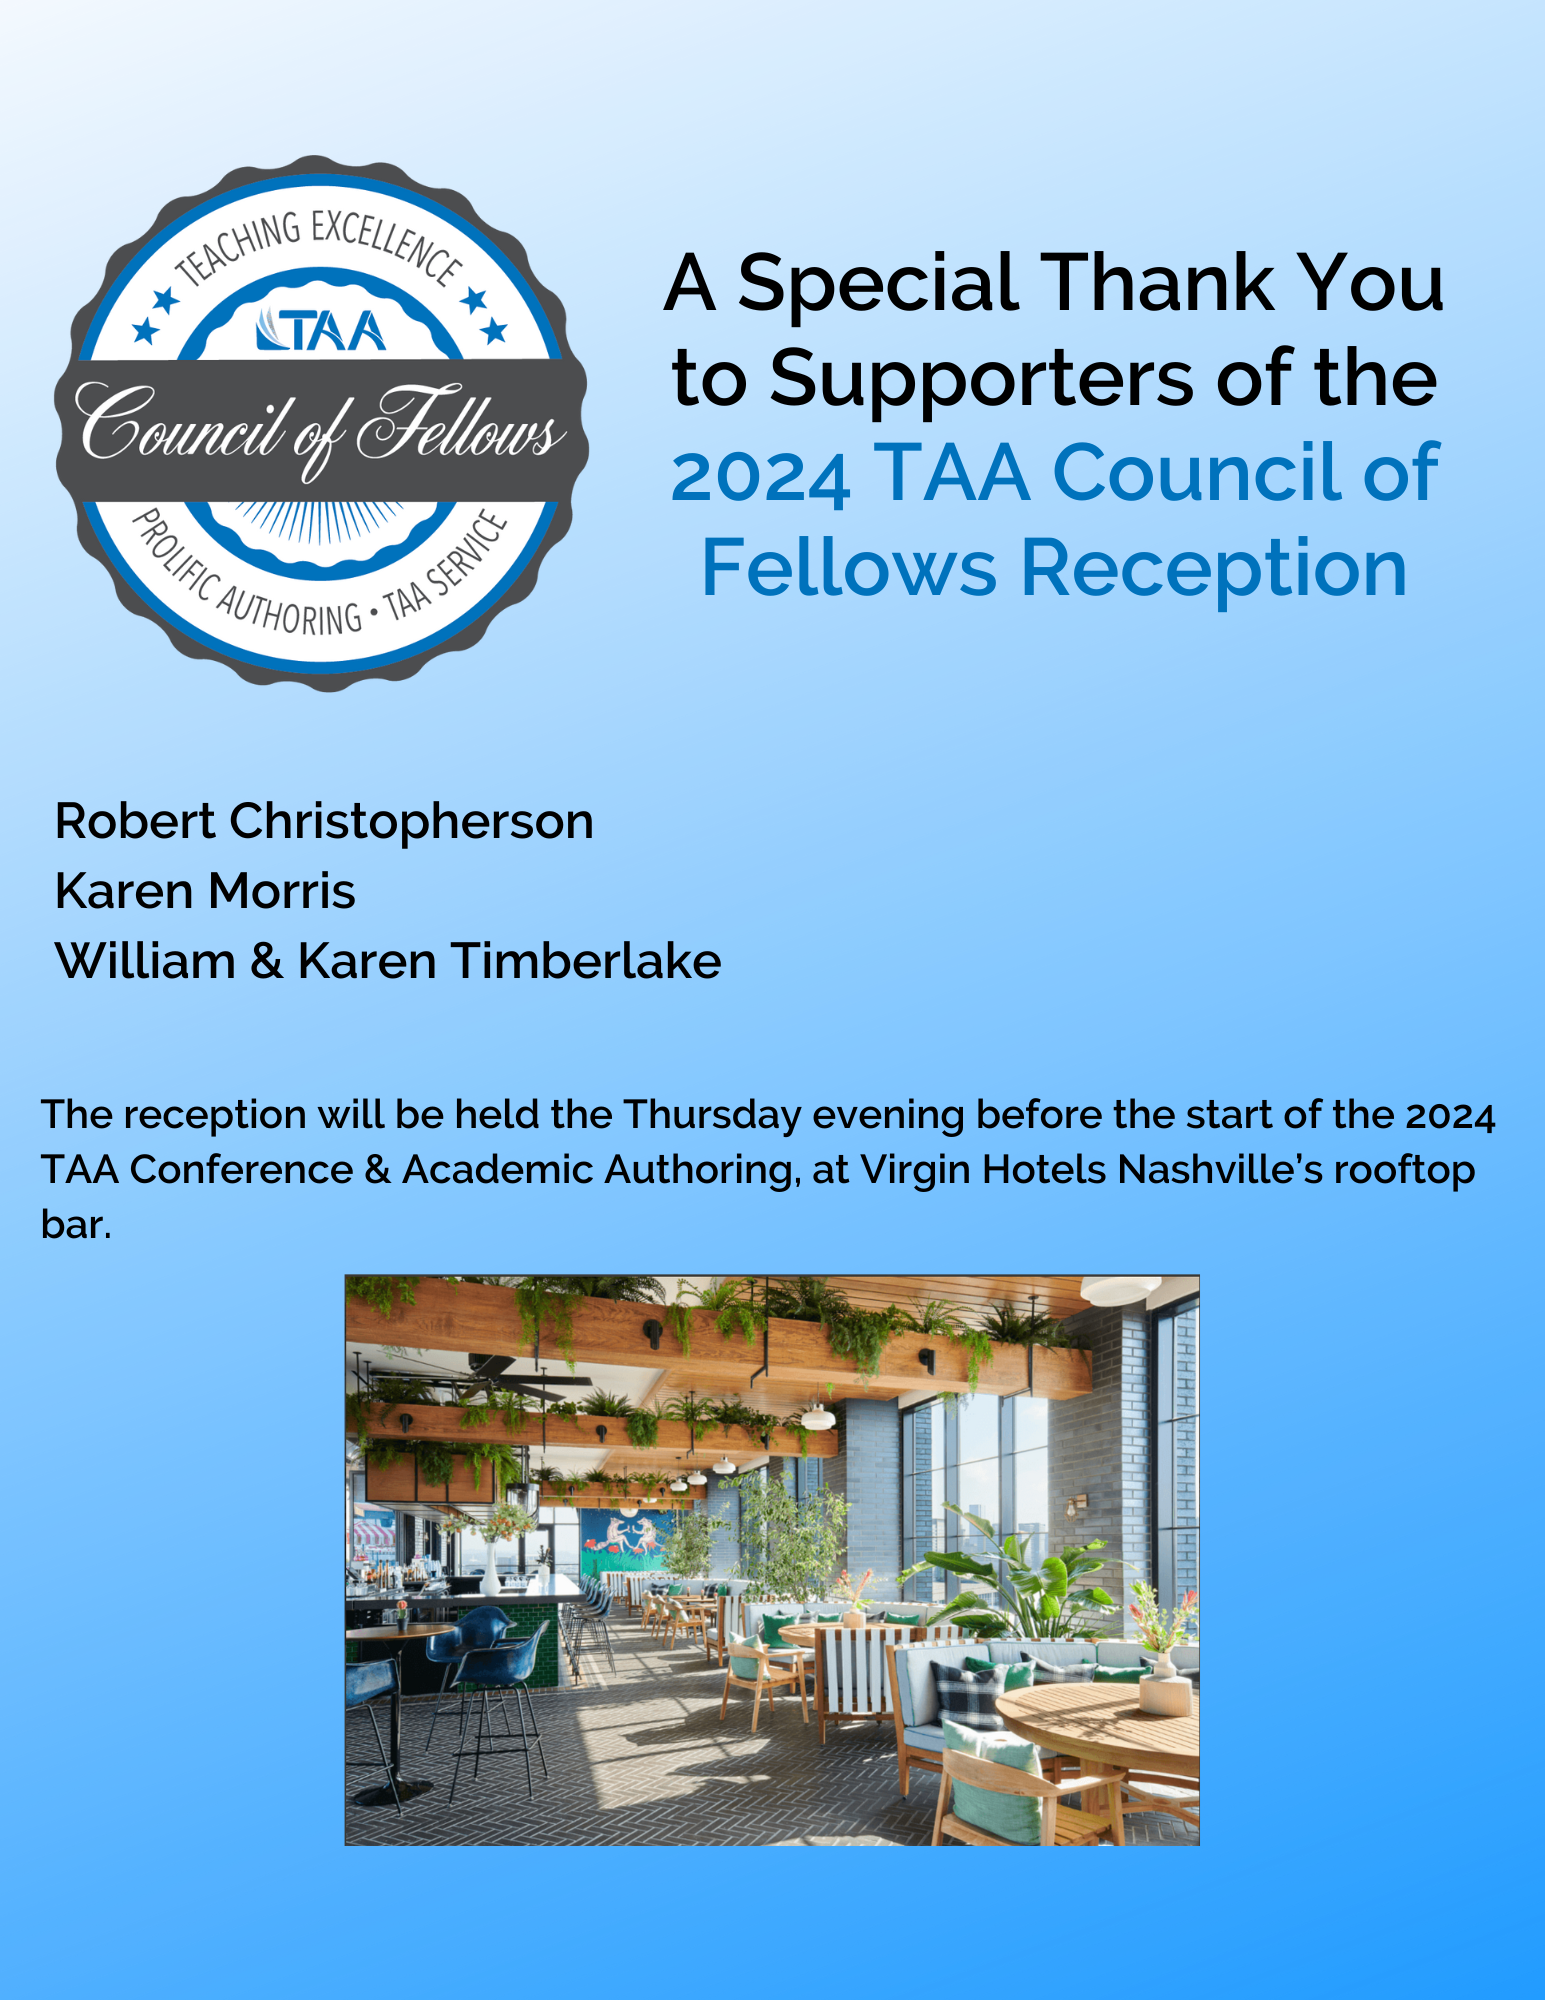 Thank you to supporters of 2024 TAA Council of Fellows Reception